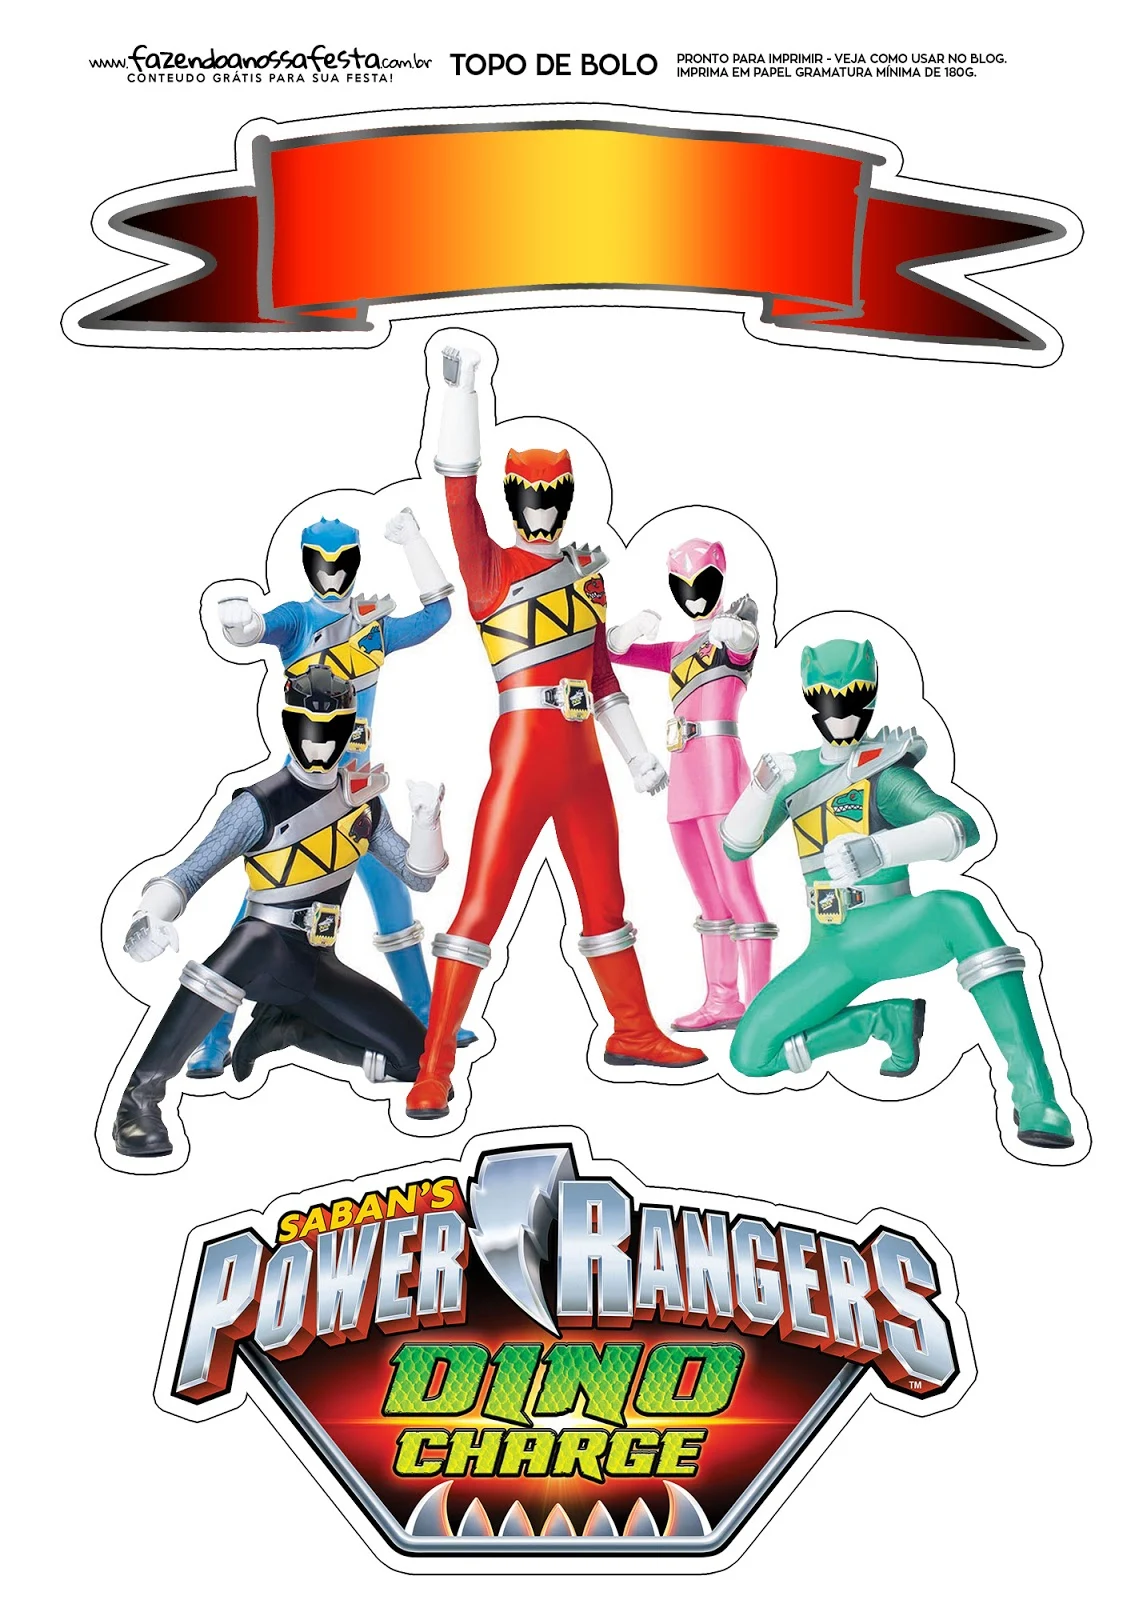 Power Rangers Free Printable Cake Toppers. Oh My Fiesta! in english